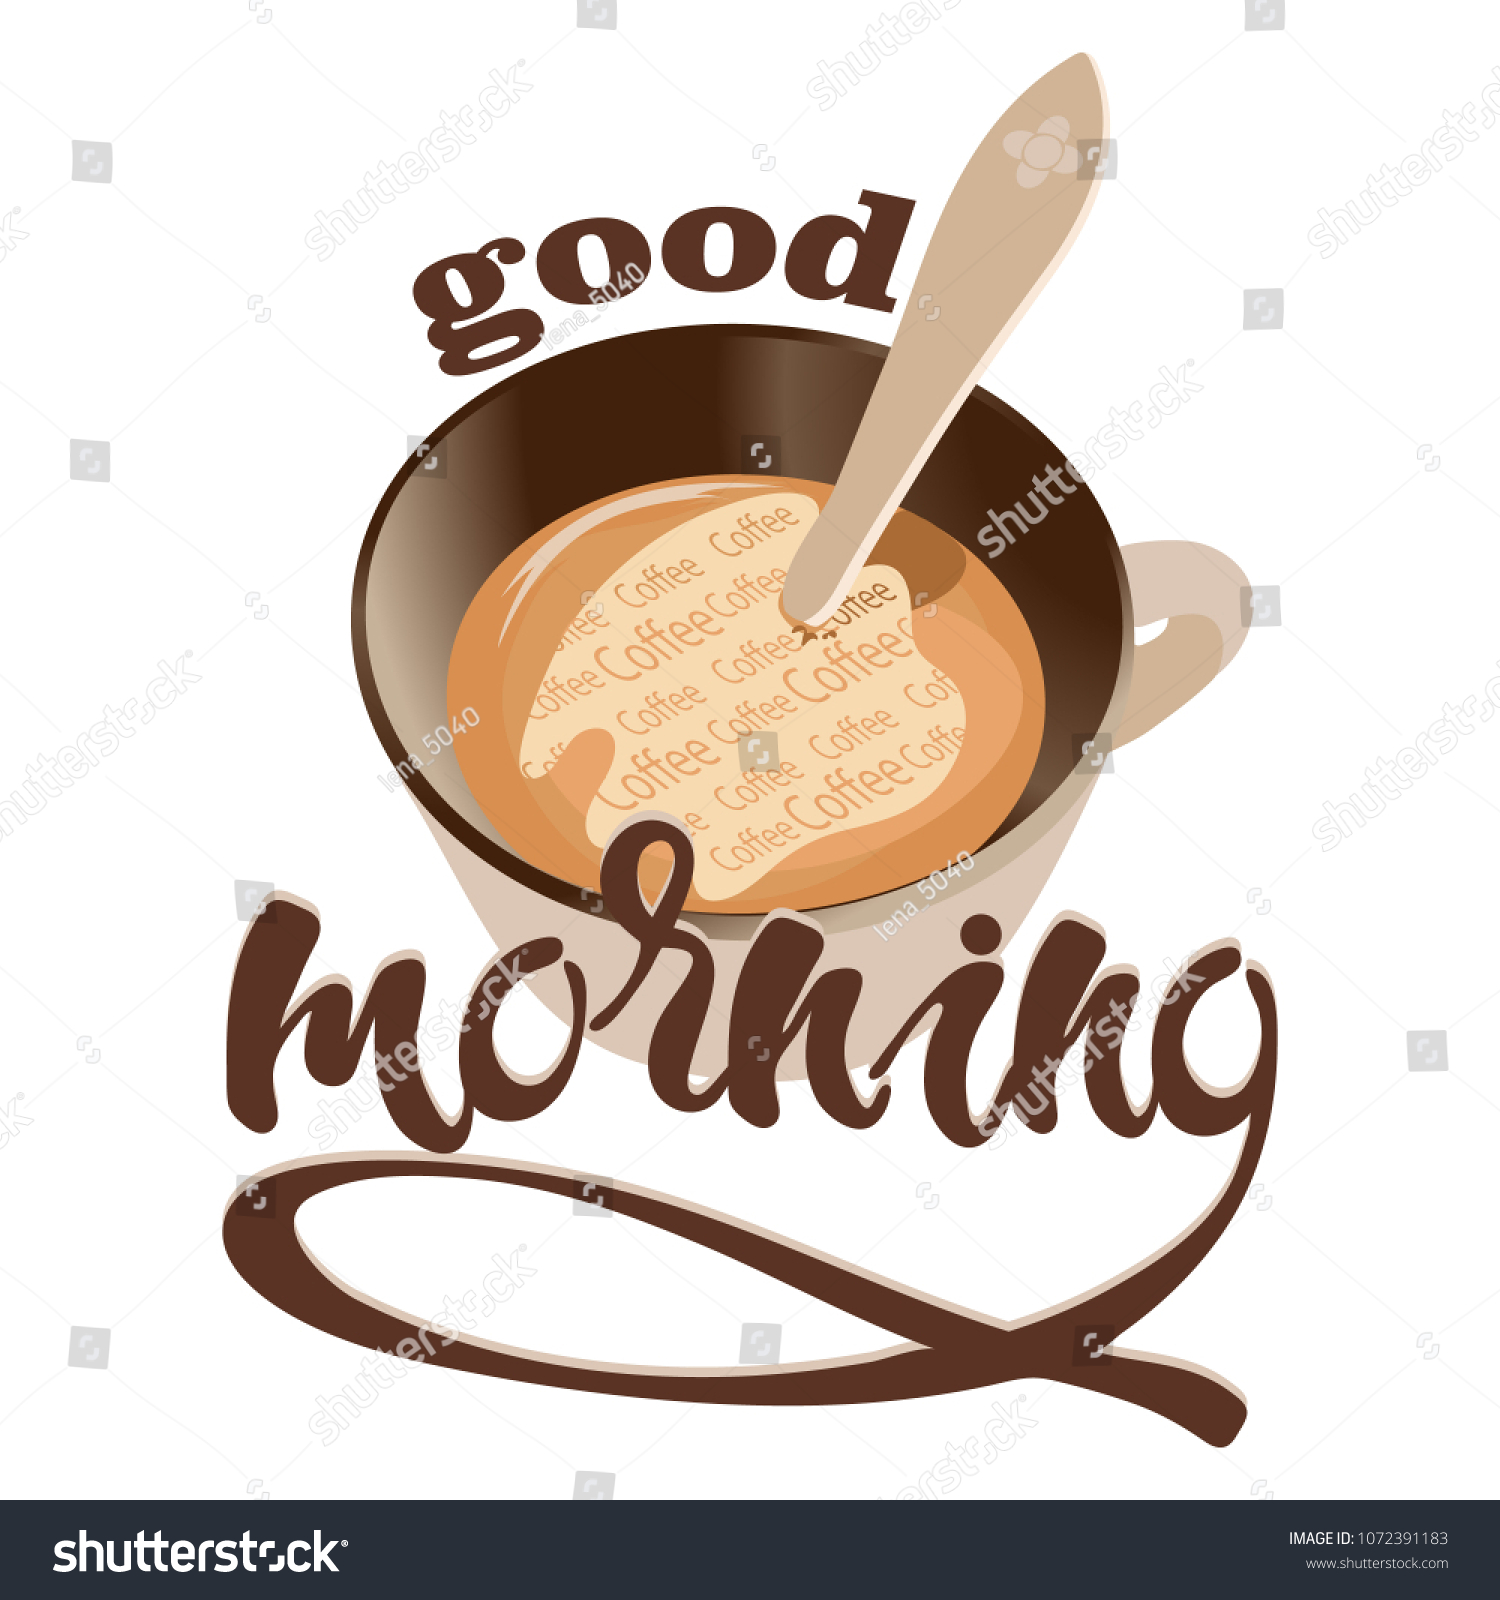 Vector Illustration Good Morning Coffee Cup Stock Vector (Royalty Free) 1072391183 | Shutterstock